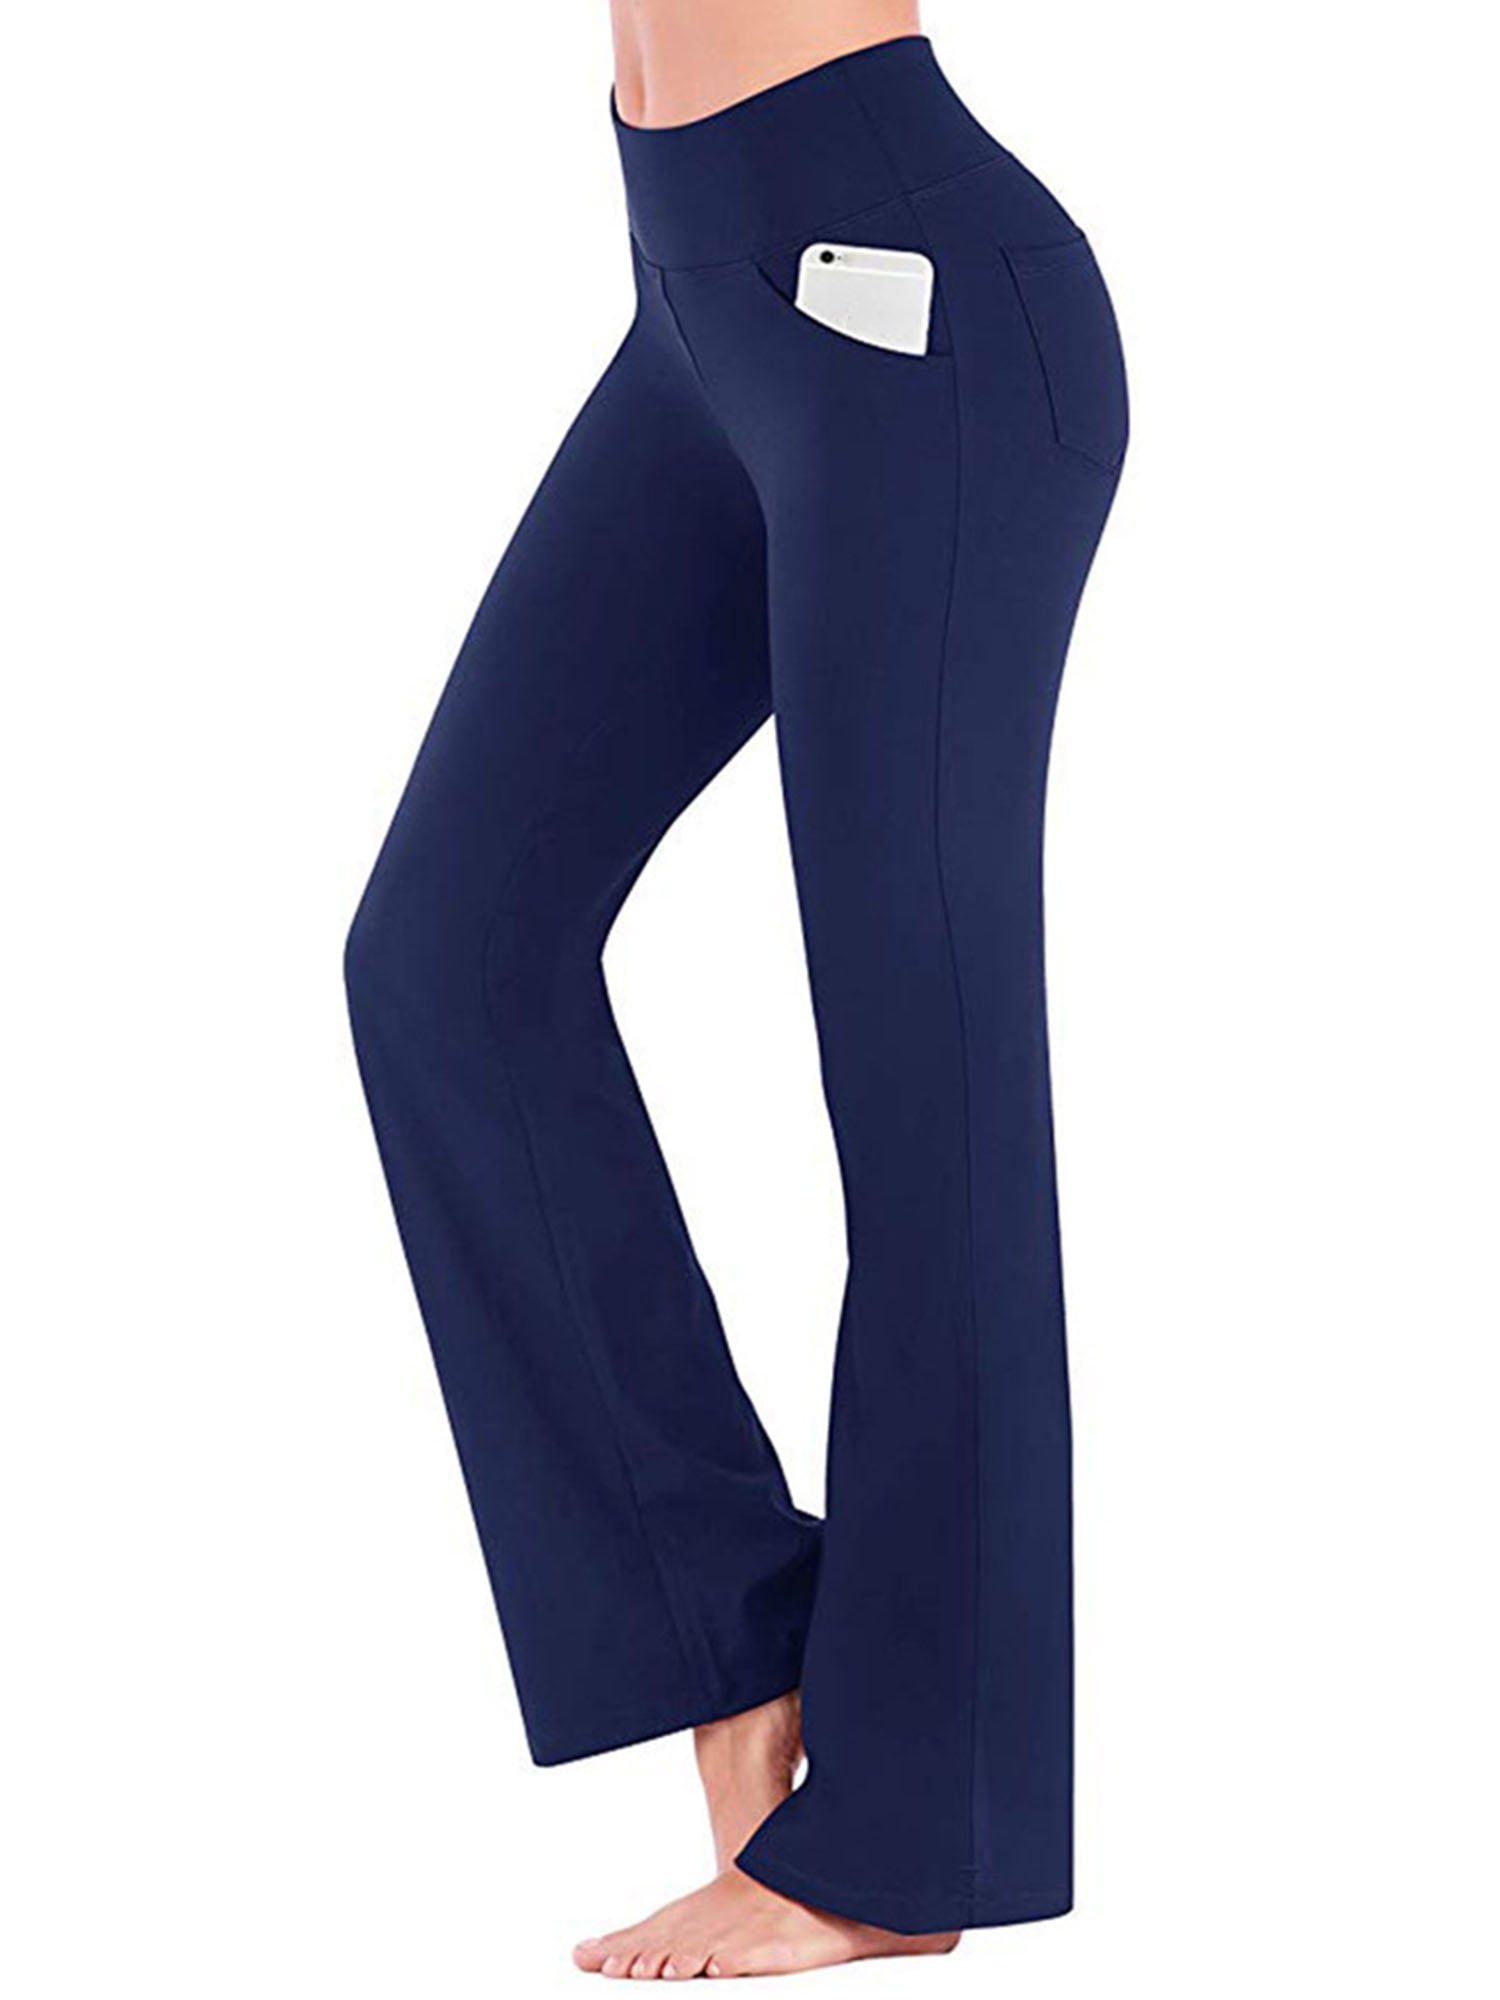 Bootcut Workout Leggings Pants with Pocket Women Ladies Casual Flare Dress  Pants Plus Size High Waist Stretch Excises Trousers Activewear 